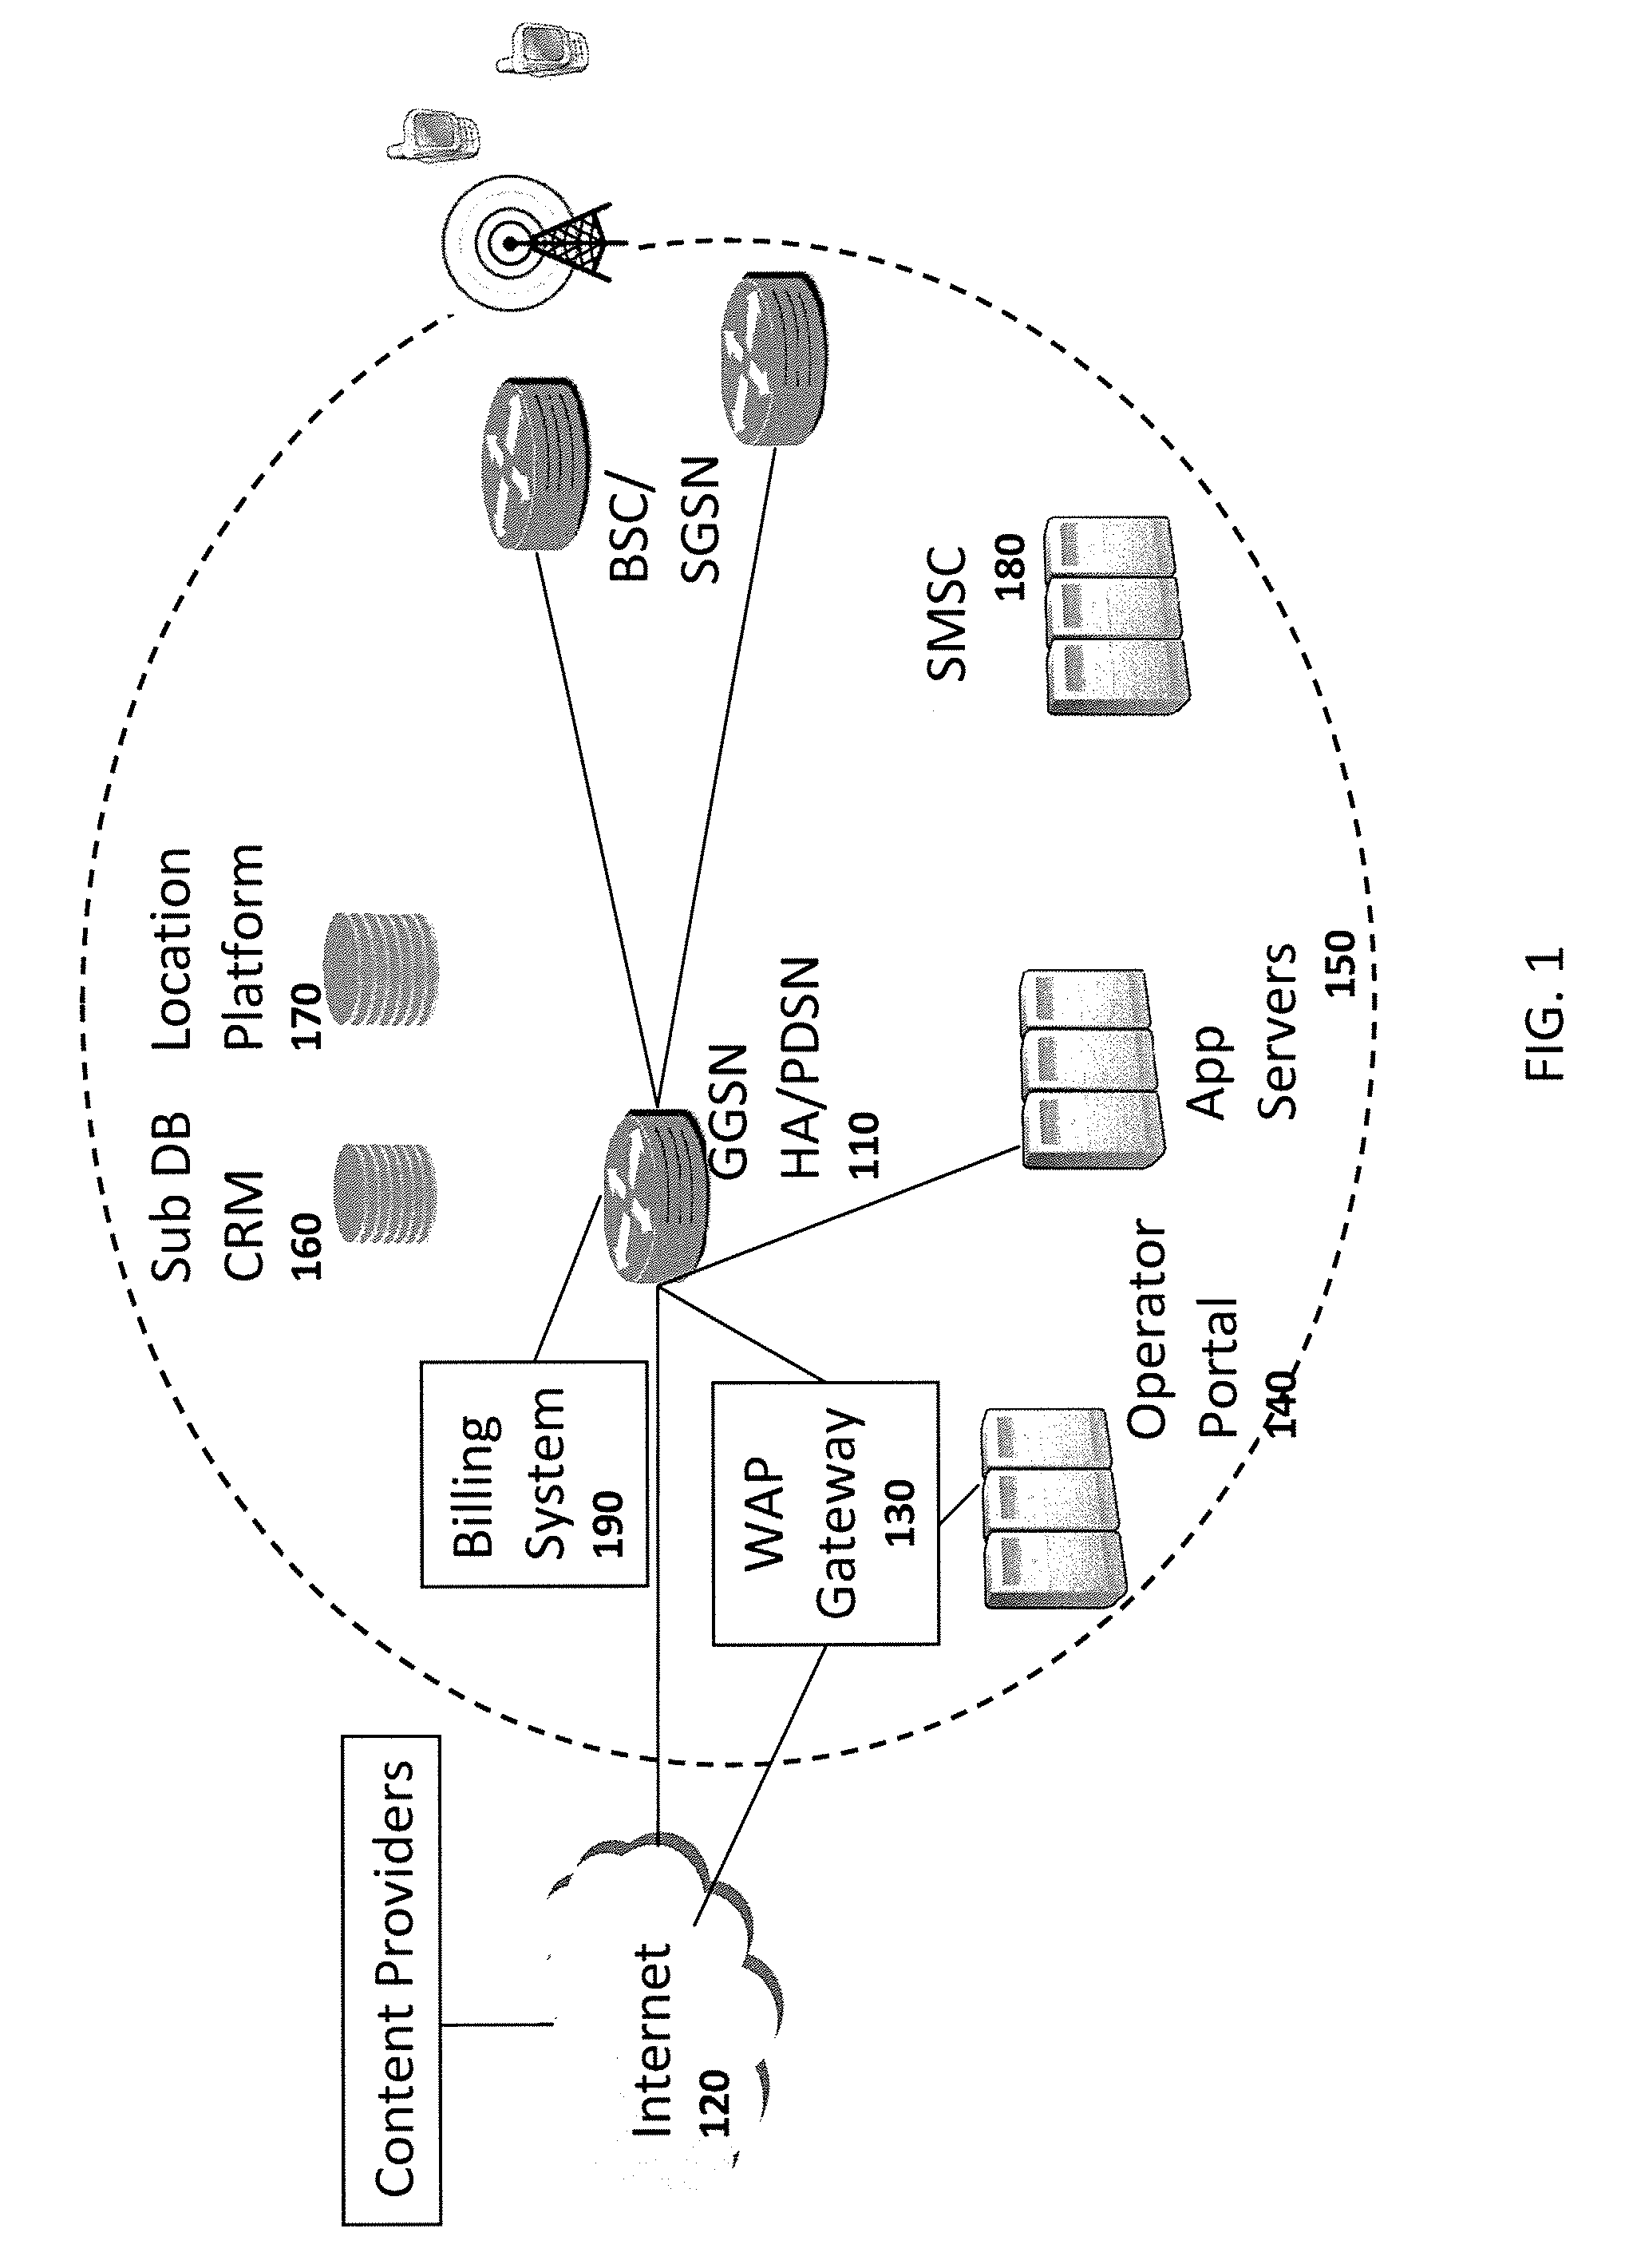 Method and apparatus for real-time multi-dimensional reporting and analyzing of data on application level activity and other user information on a mobile data network